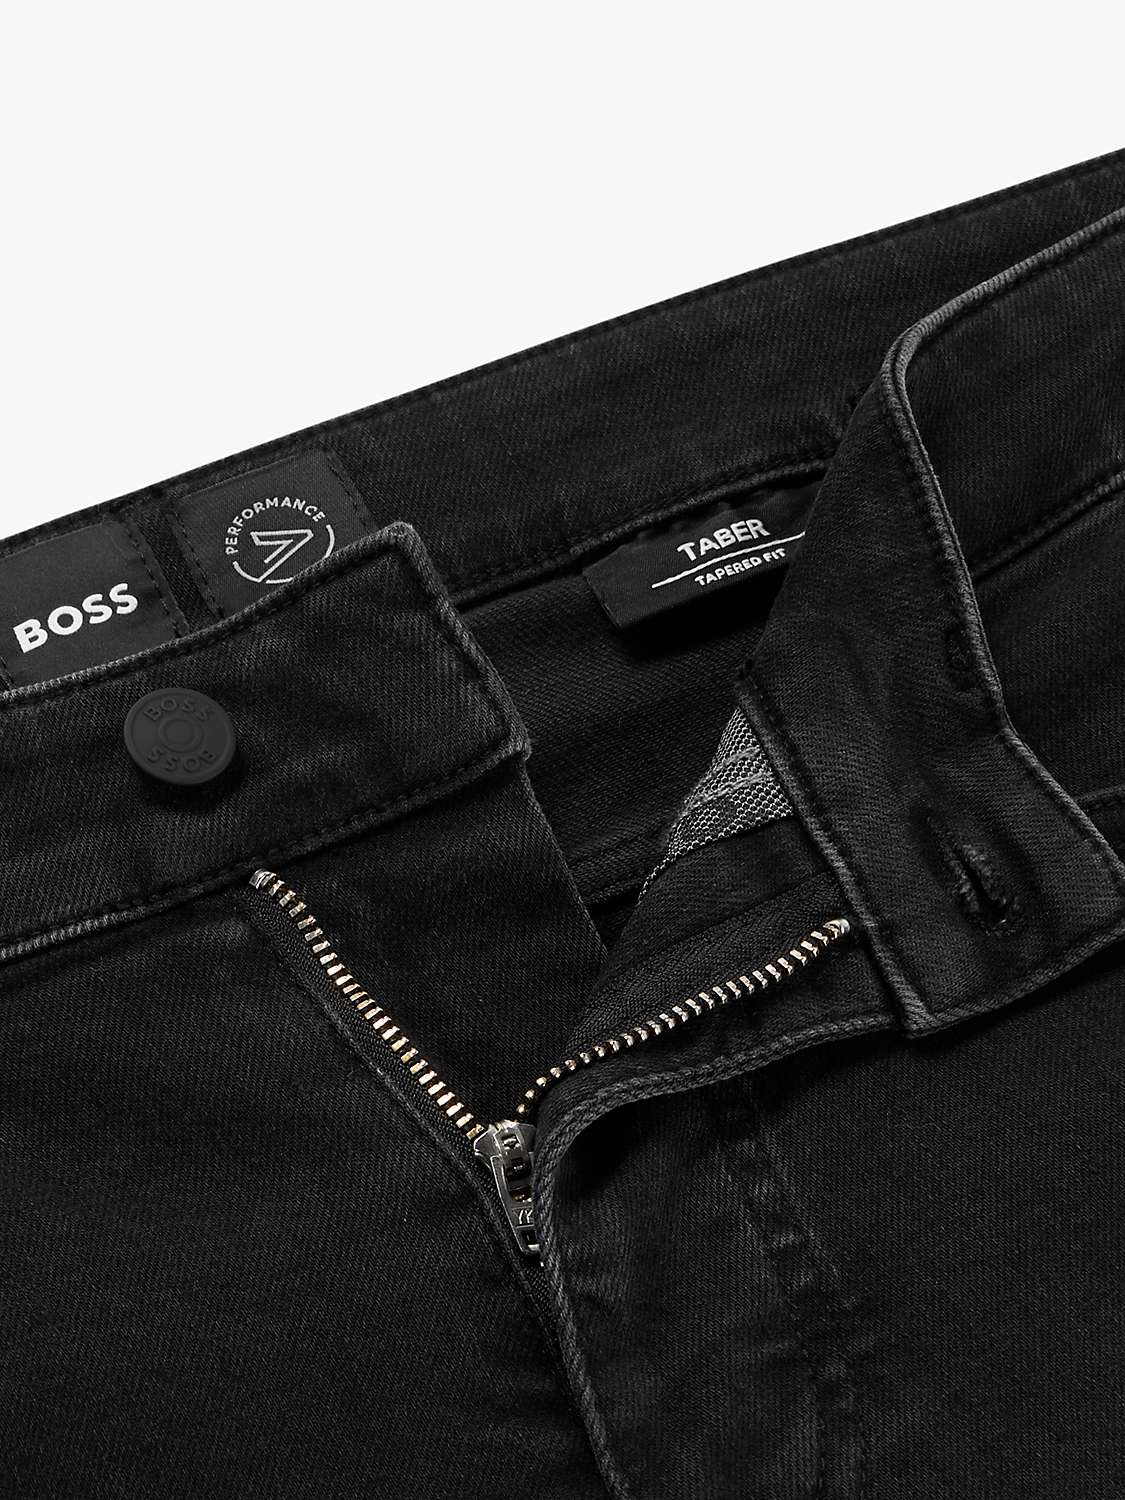 BOSS Taber Tapered Fit Jeans, Black at John Lewis & Partners